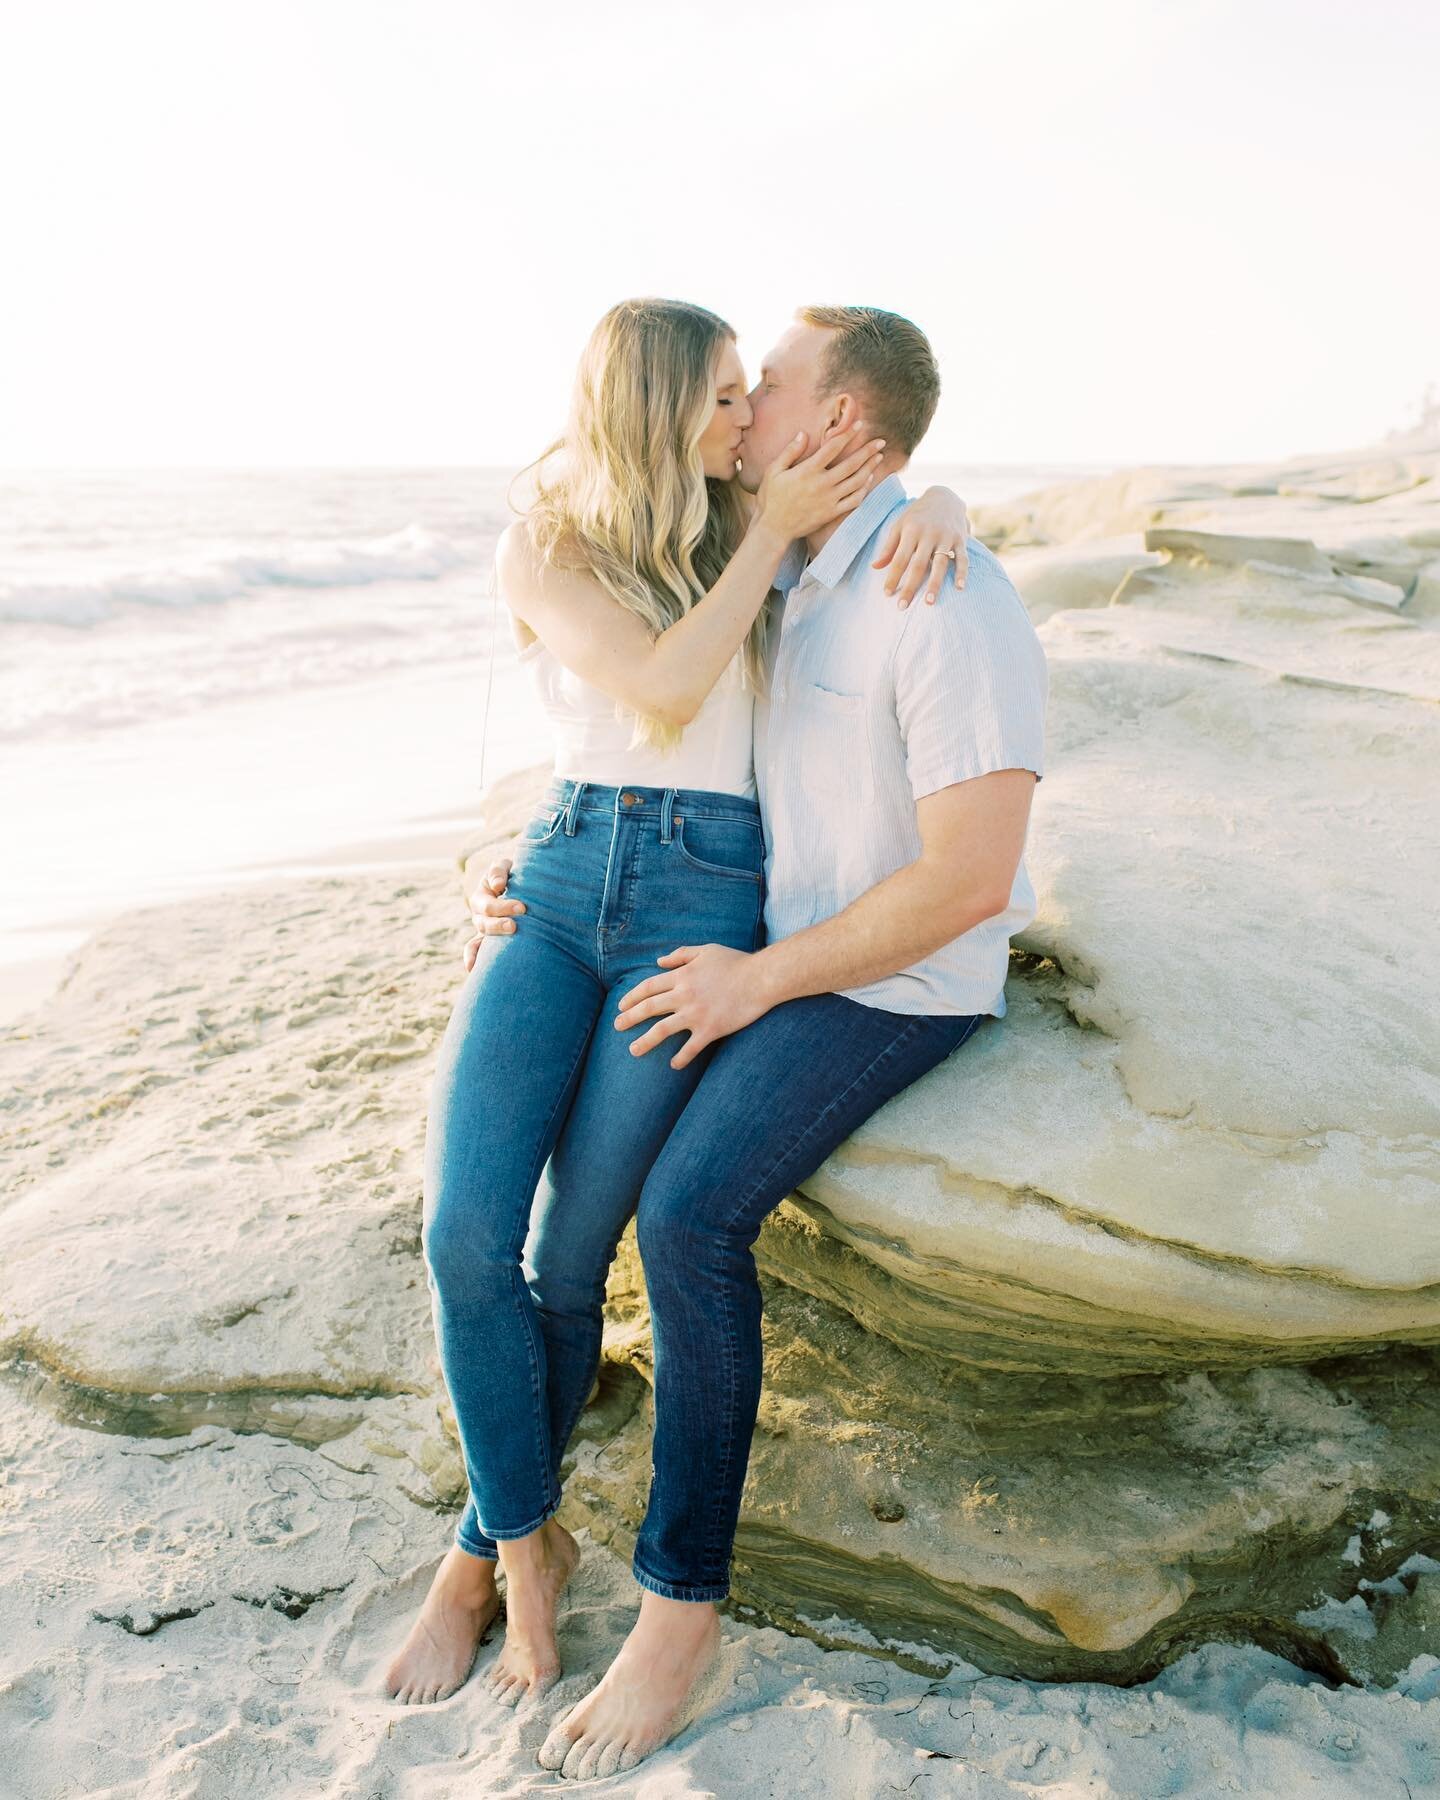 Kyle + Caitlin just sittin reallll cute over here🌟

We had a blast poppin champagne &amp; playing in the sand during their engagement session! My favorite thing was afterwards, when Caitlin showed me a picture of them on the beach from PROM. She sai